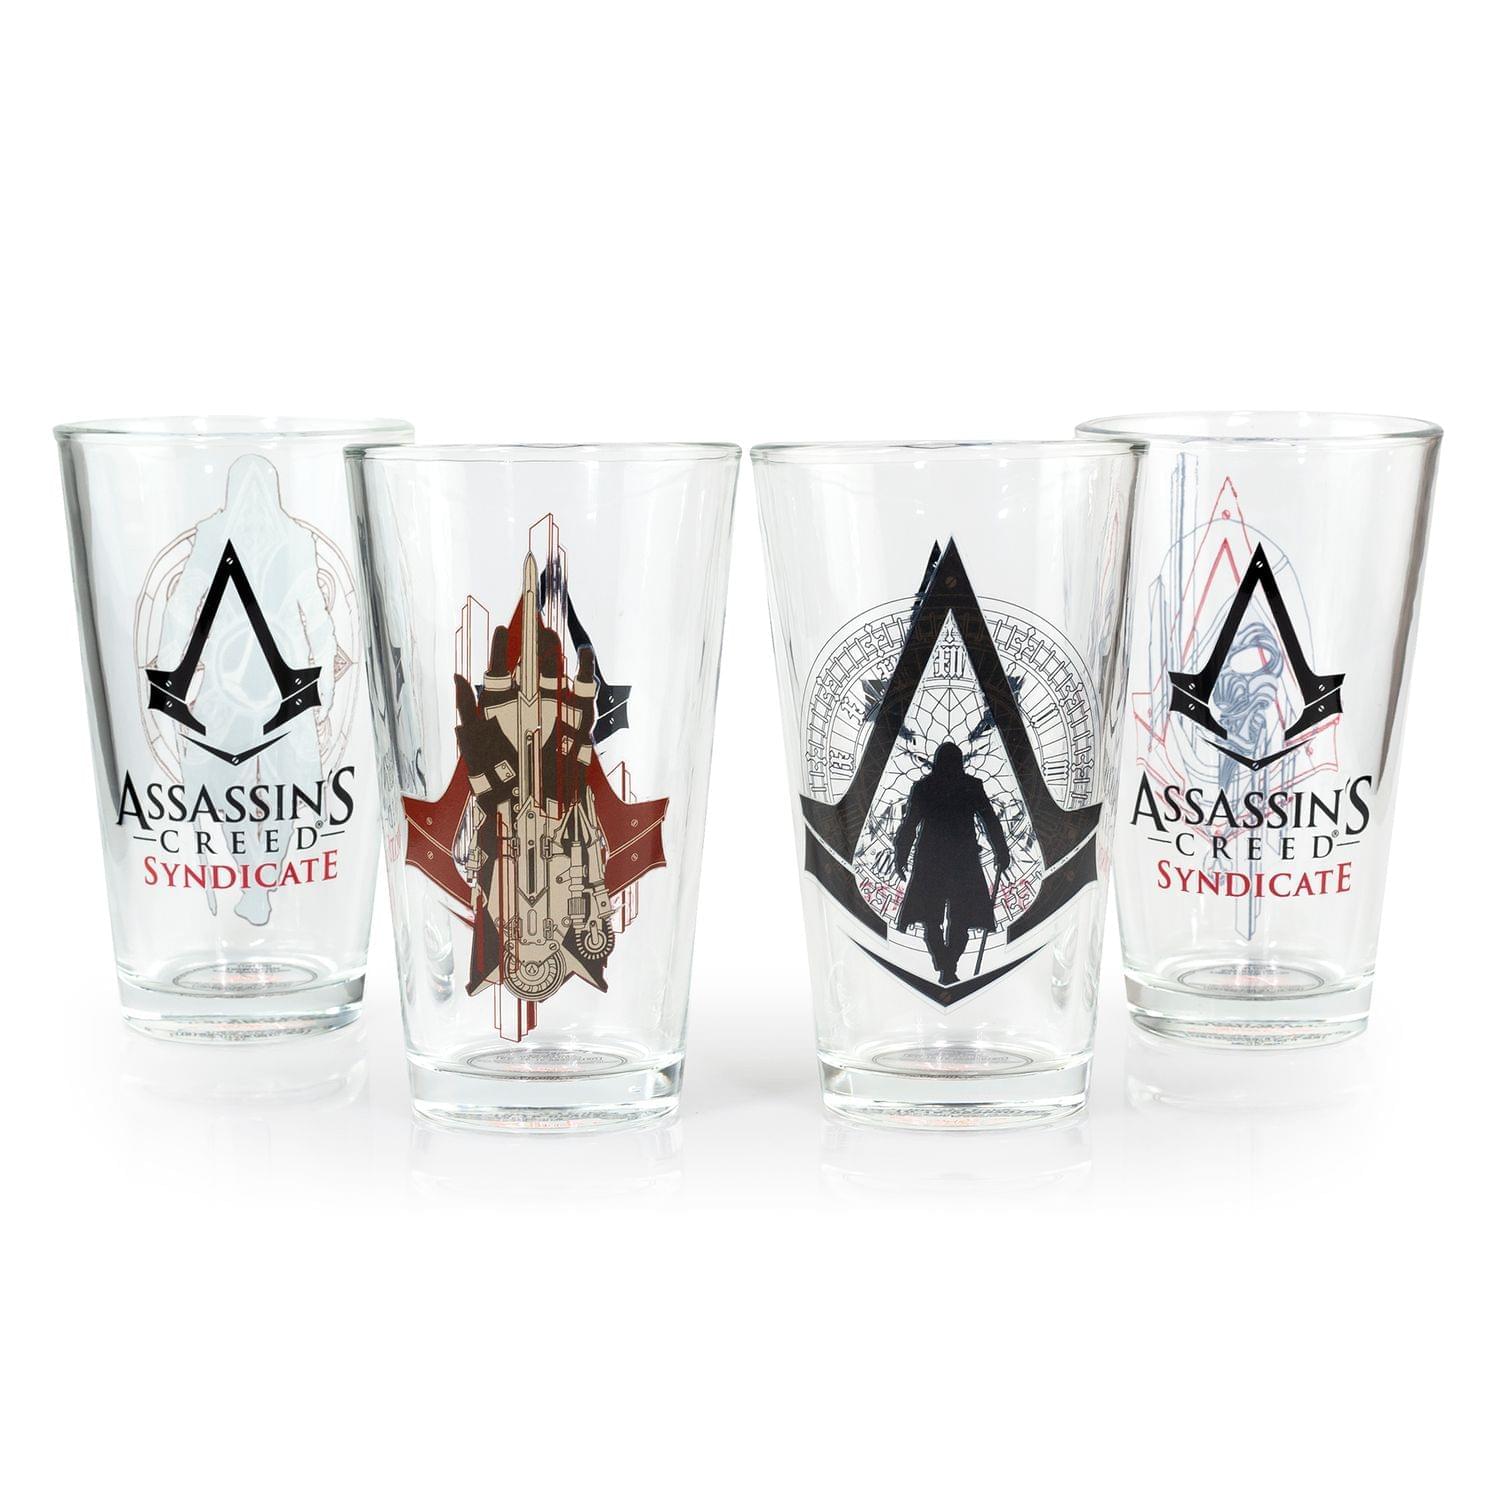 OFFICIAL Assassin's Creed Syndicate Pint Glasses | Premium Set | 16 oz. Set of 4